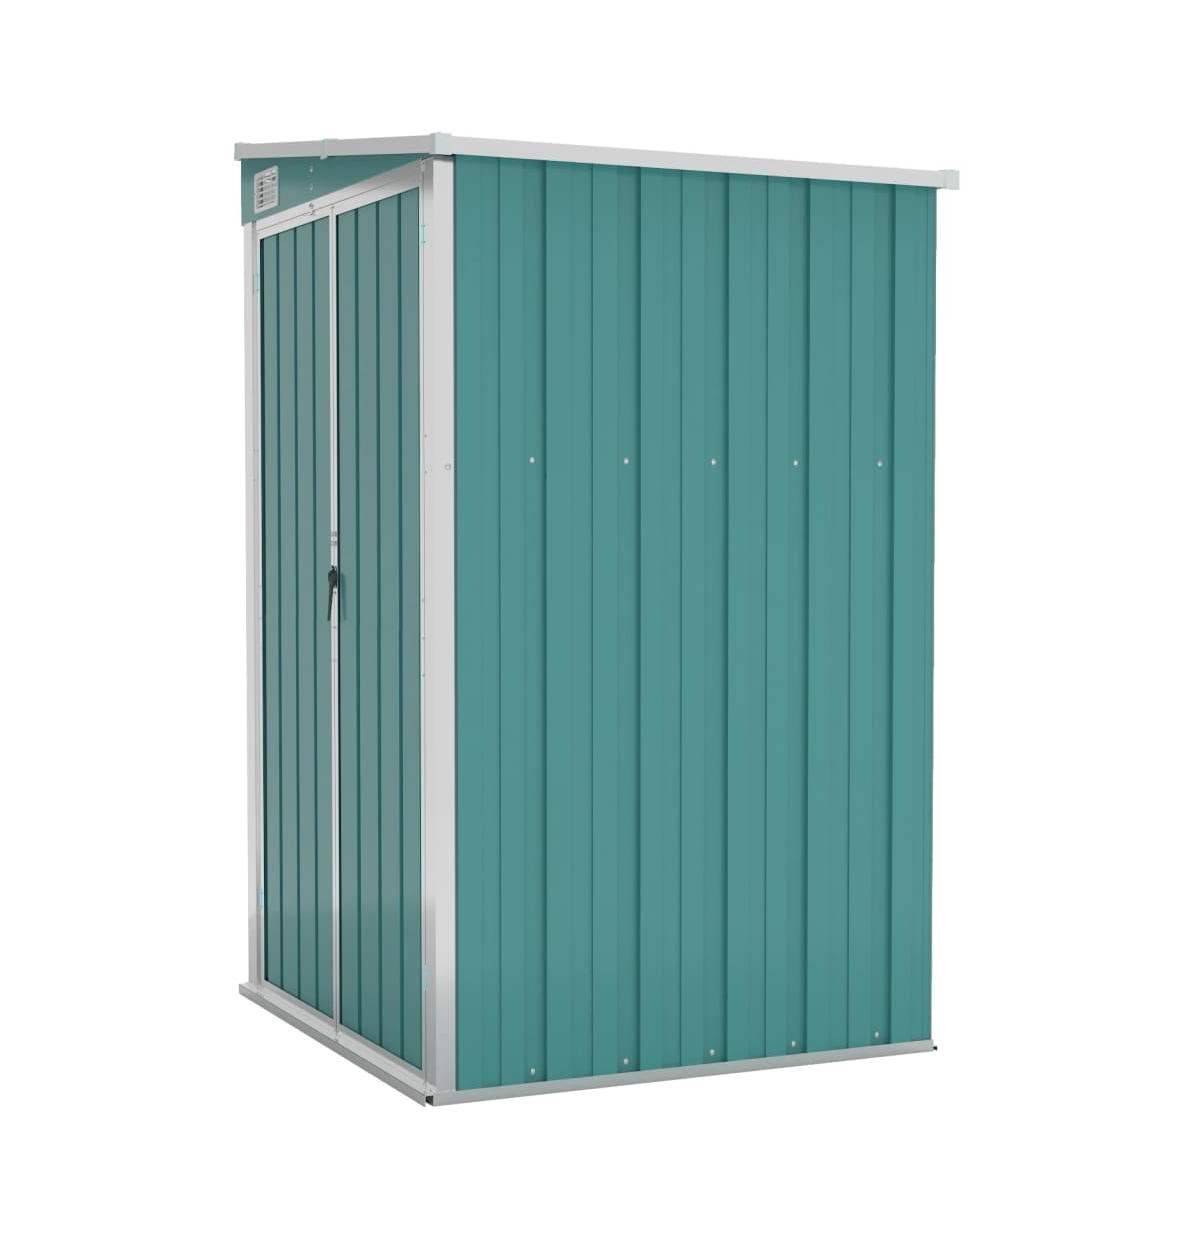 Wall-mounted Garden Shed Green 46.5"x39.4"x70.1" Galvanized Steel - Green